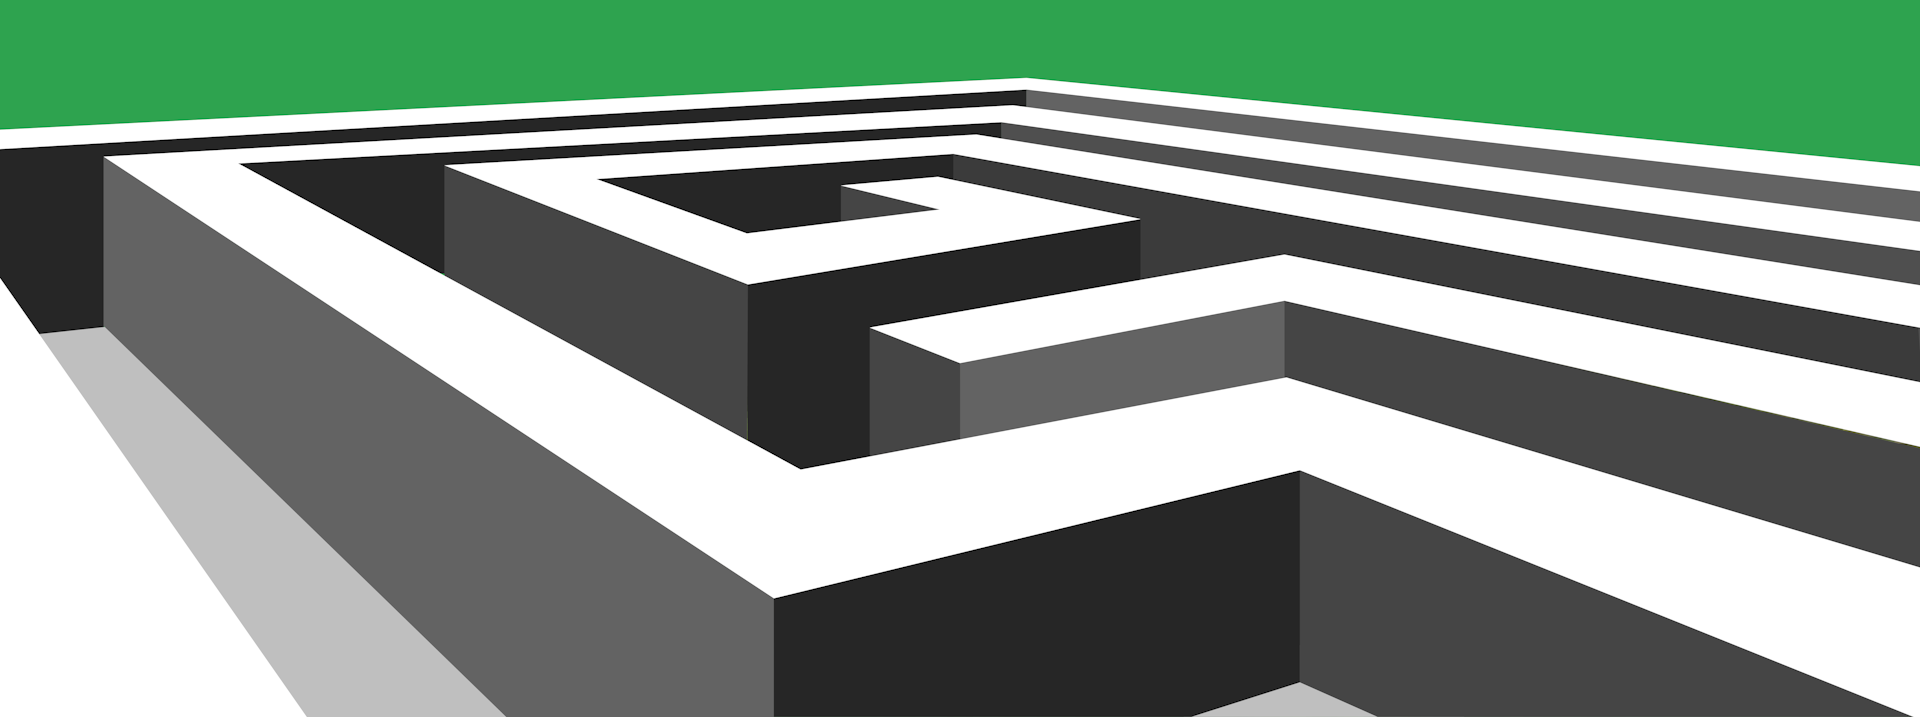 An illustration that shows a close-up view of a sharply angled maze.